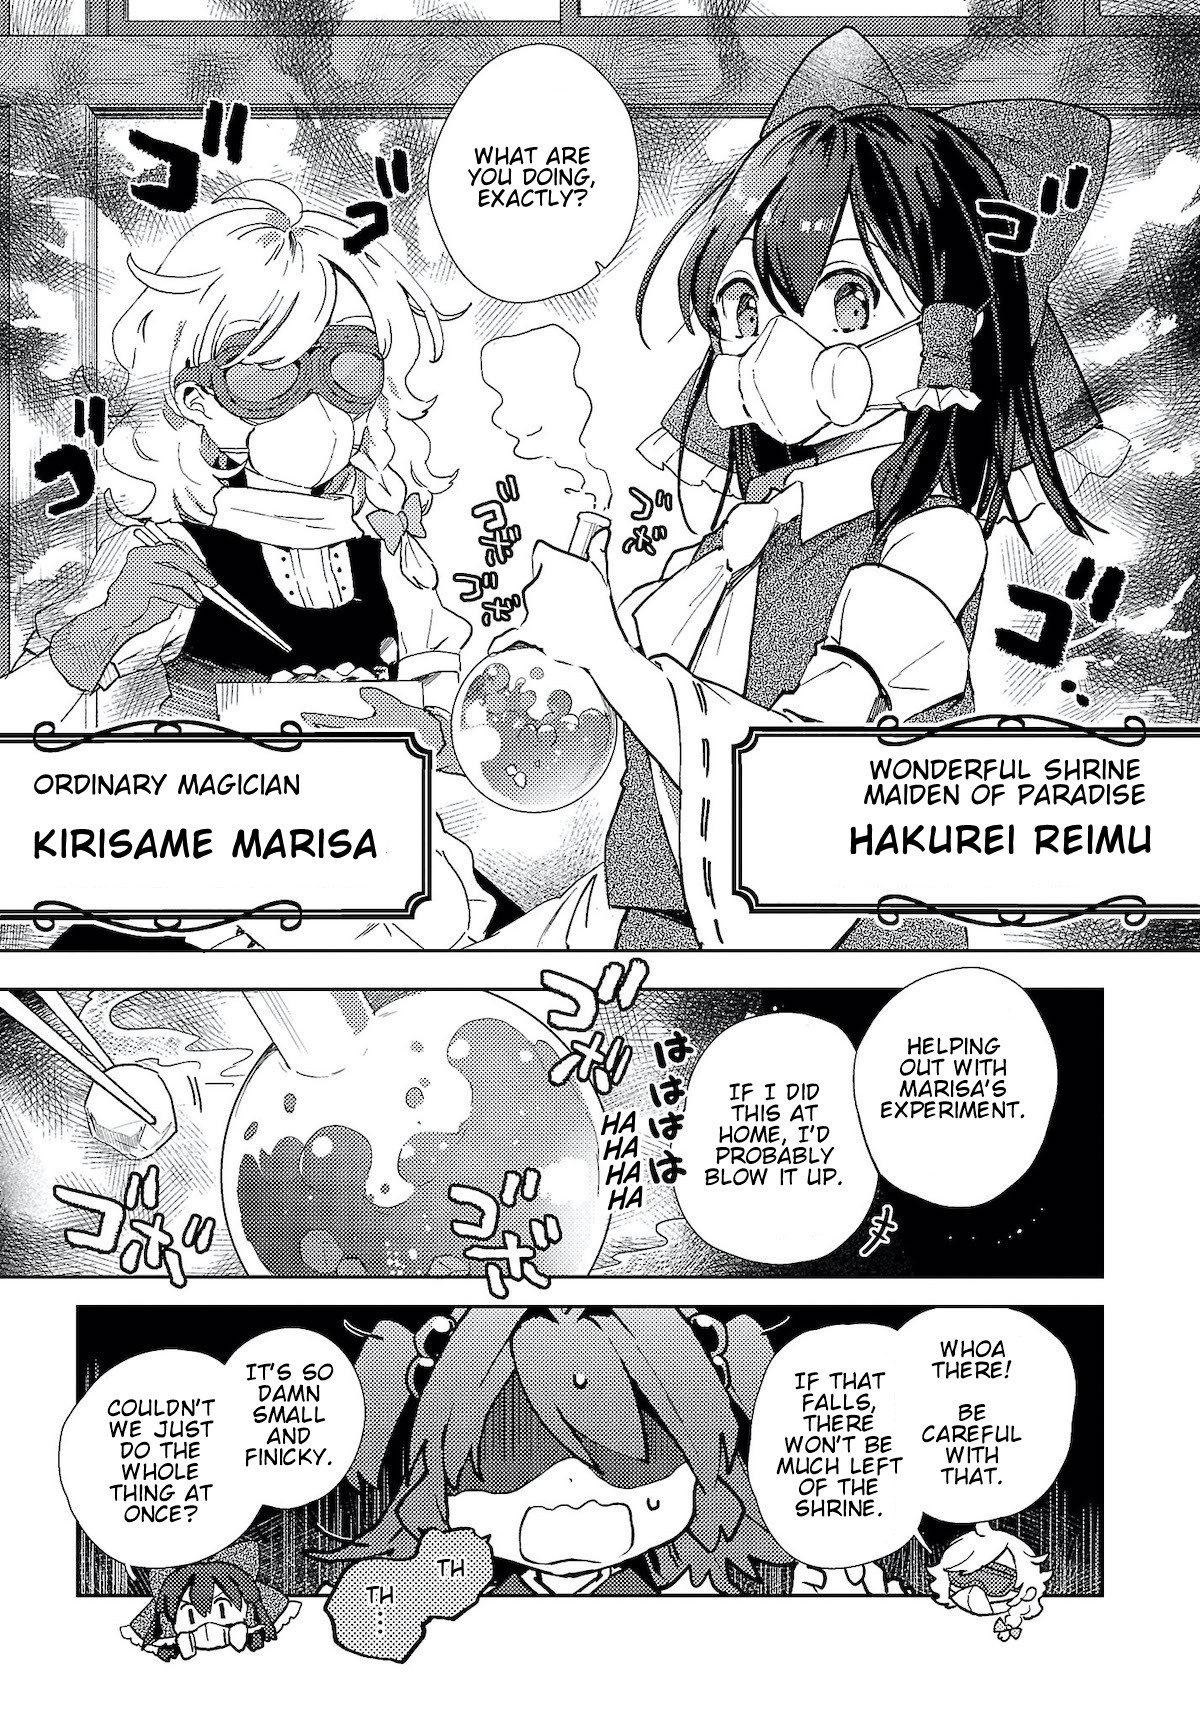 The Shinigami's Rowing Her Boat As Usual - Touhou Chapter 4 #3